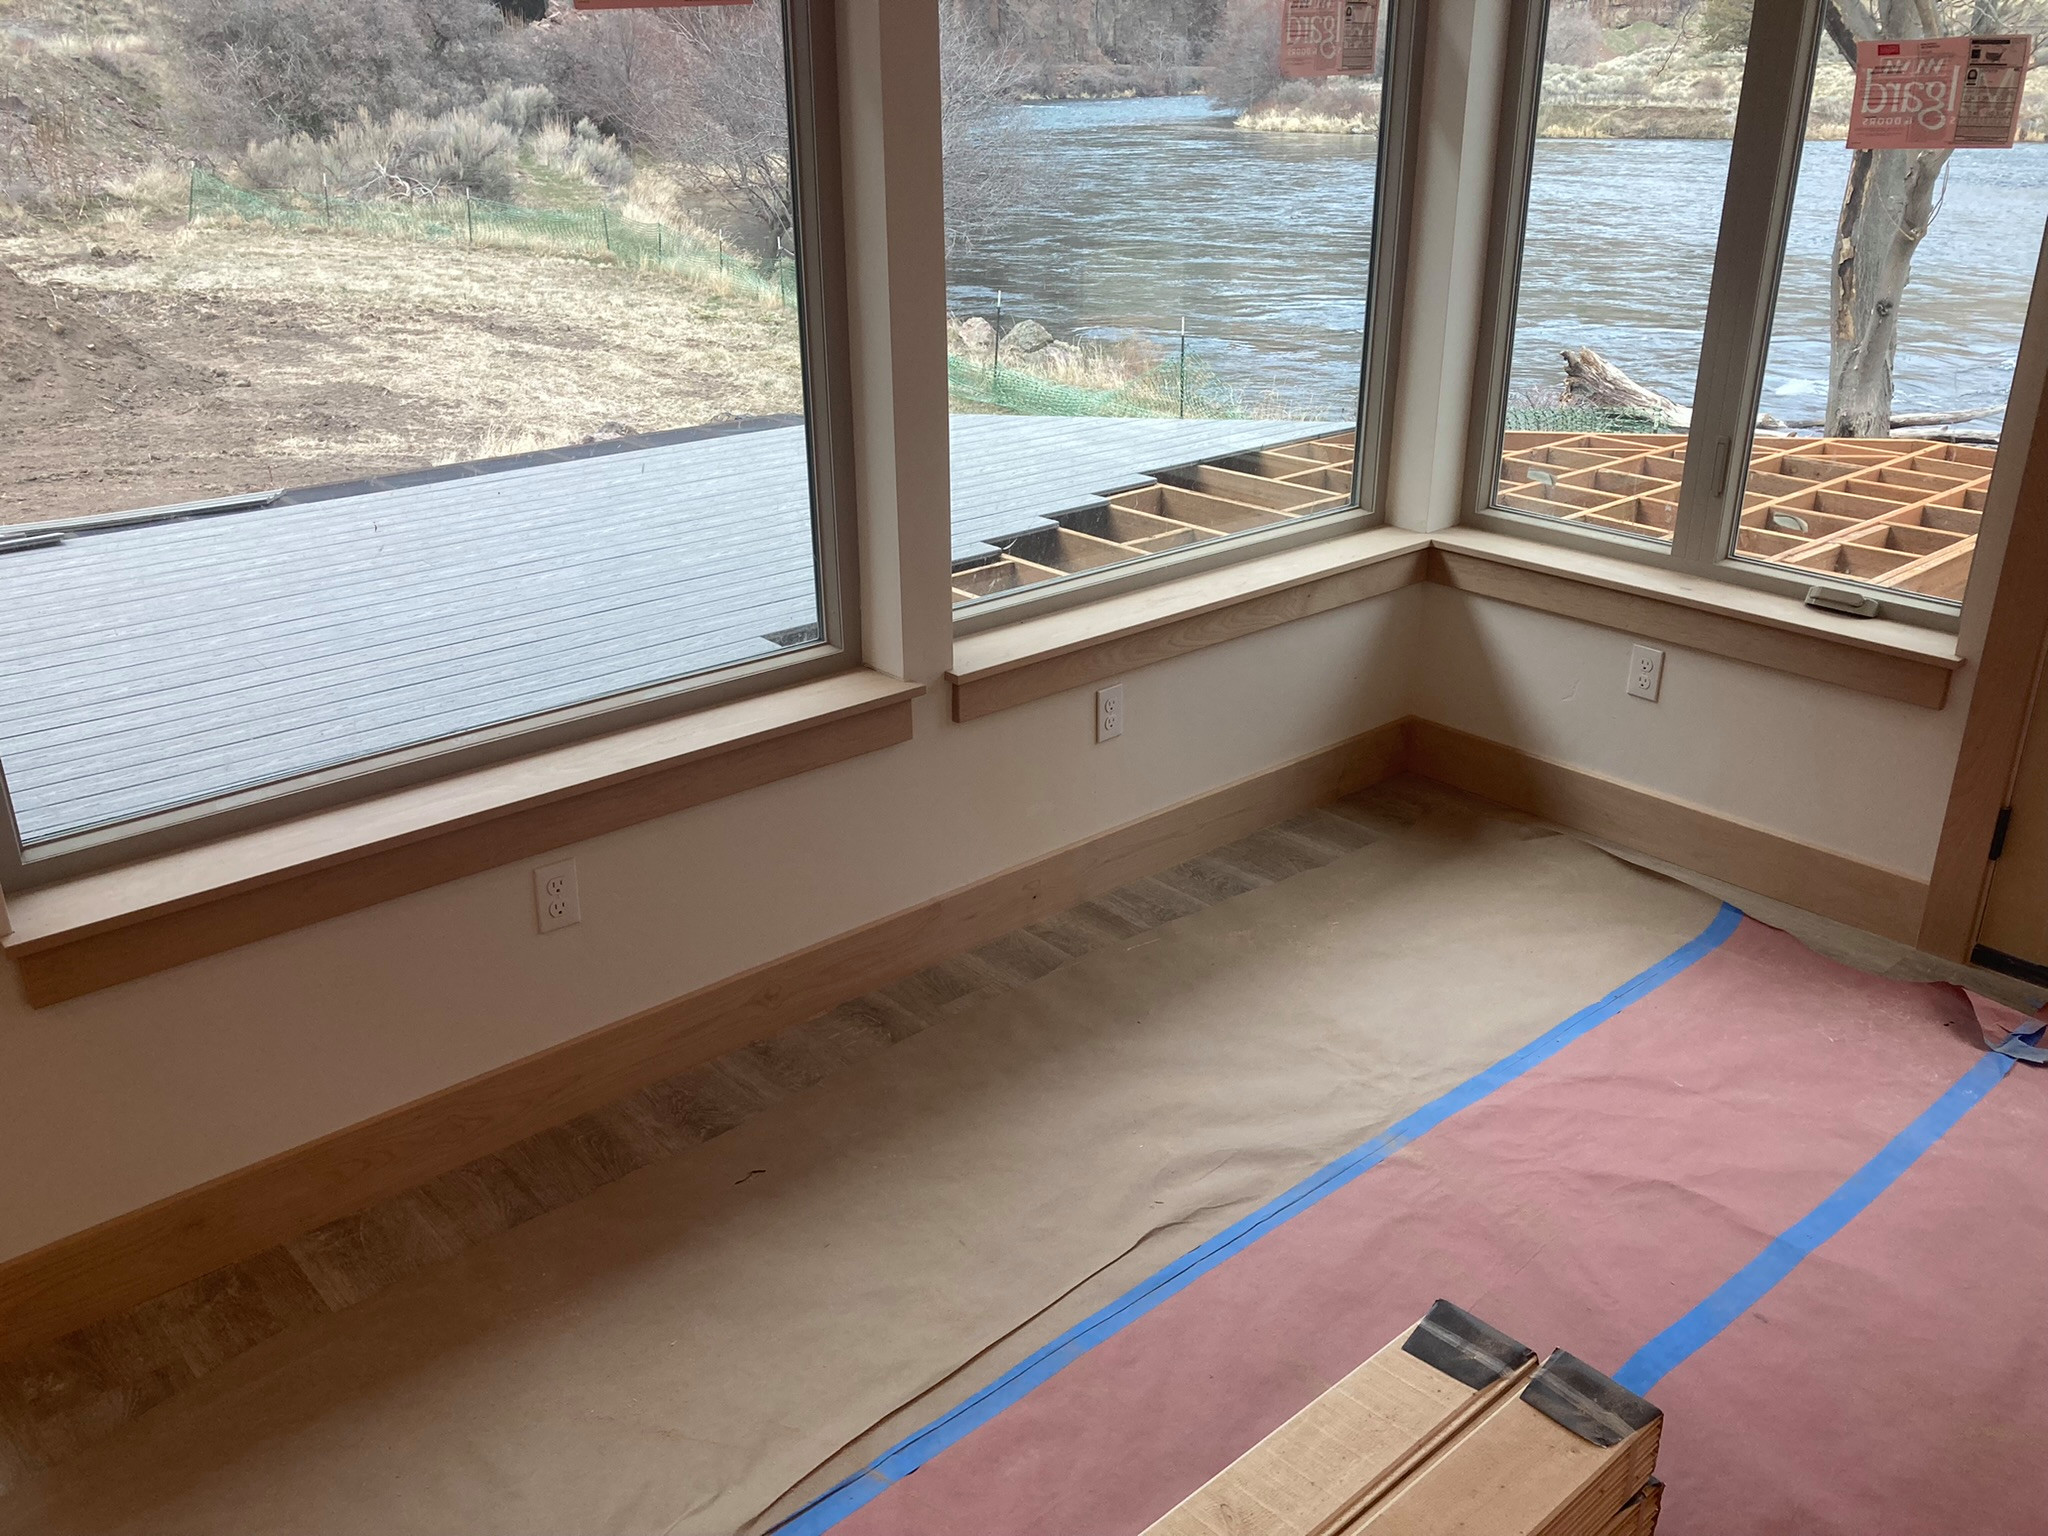 Windowsills & Baseboards& What a View!